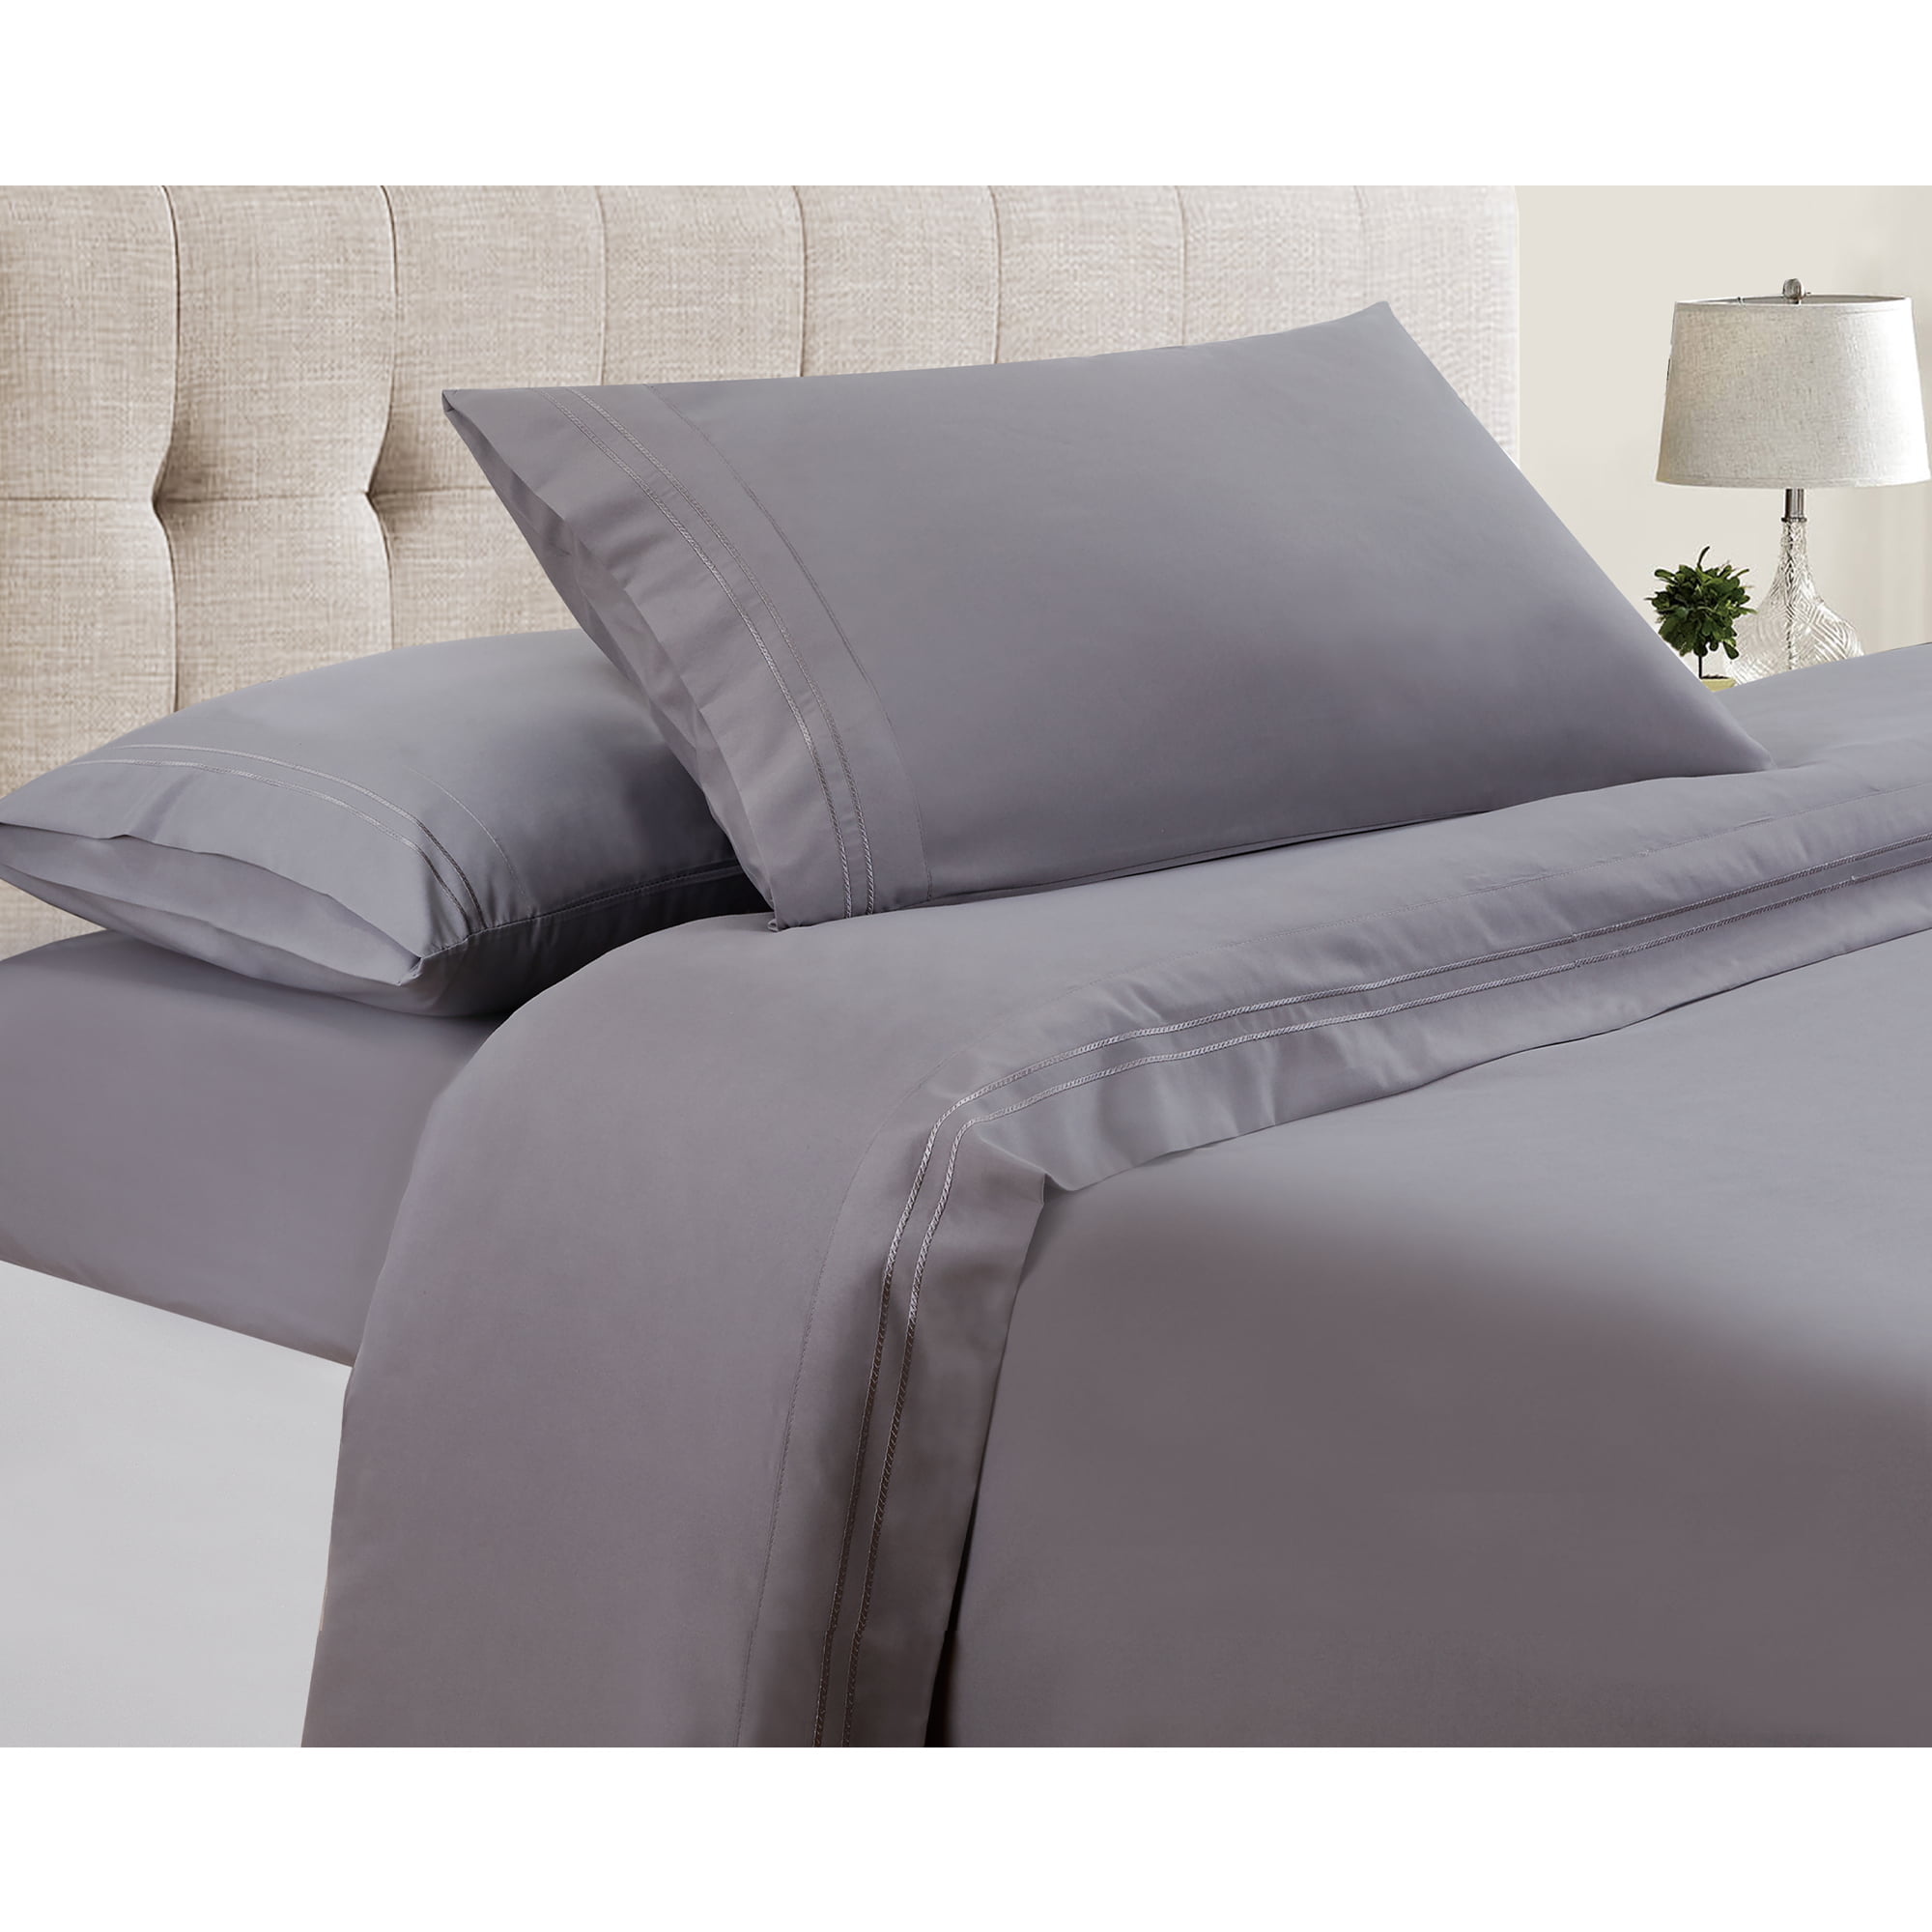 Twin XL Manor Ridge Luxury 100GSM Brushed Microfiber Hypoallergenic Fitted Sheet Silver